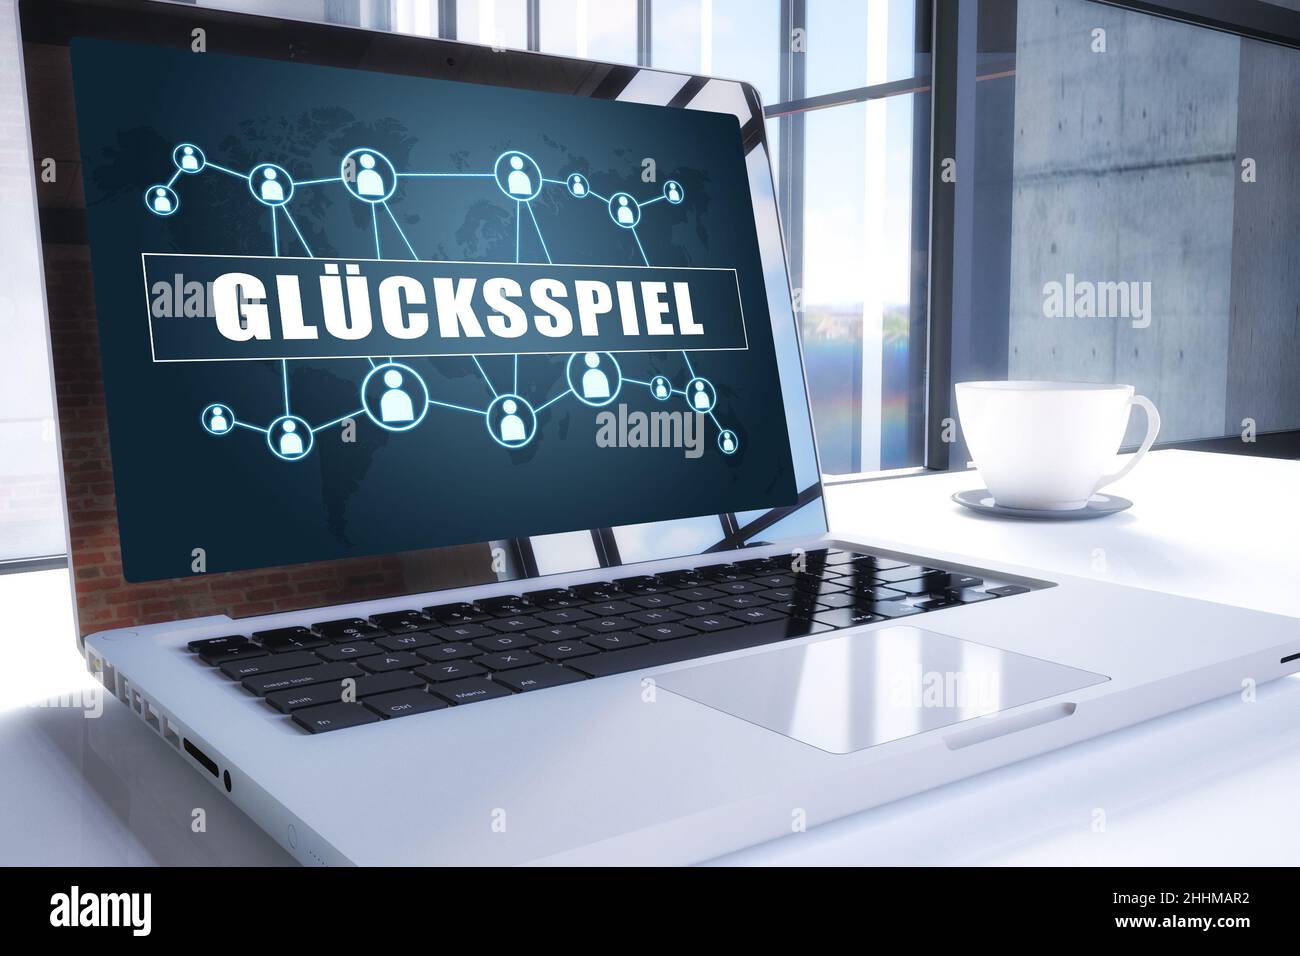 Glücksspiel - german word for gambling or game of chance. Text on modern laptop screen in office environment. 3D render illustration business text con Stock Photo